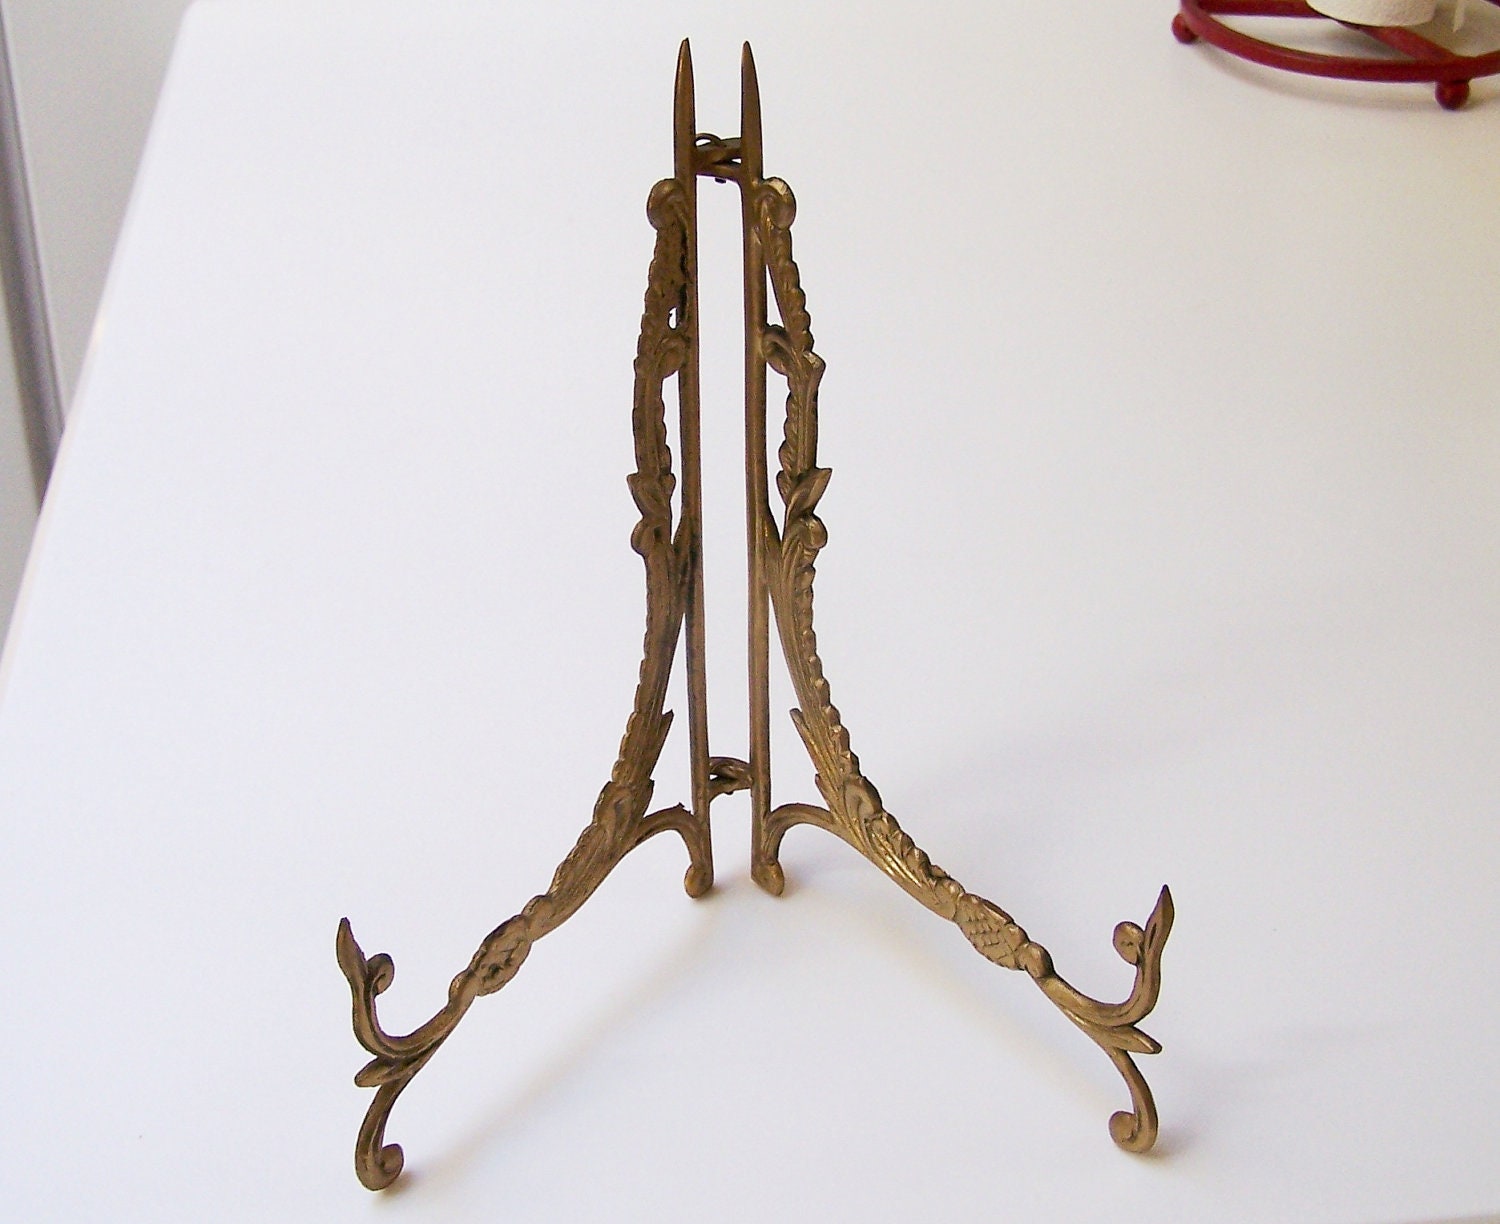 Vintage brass plate stand or book stand